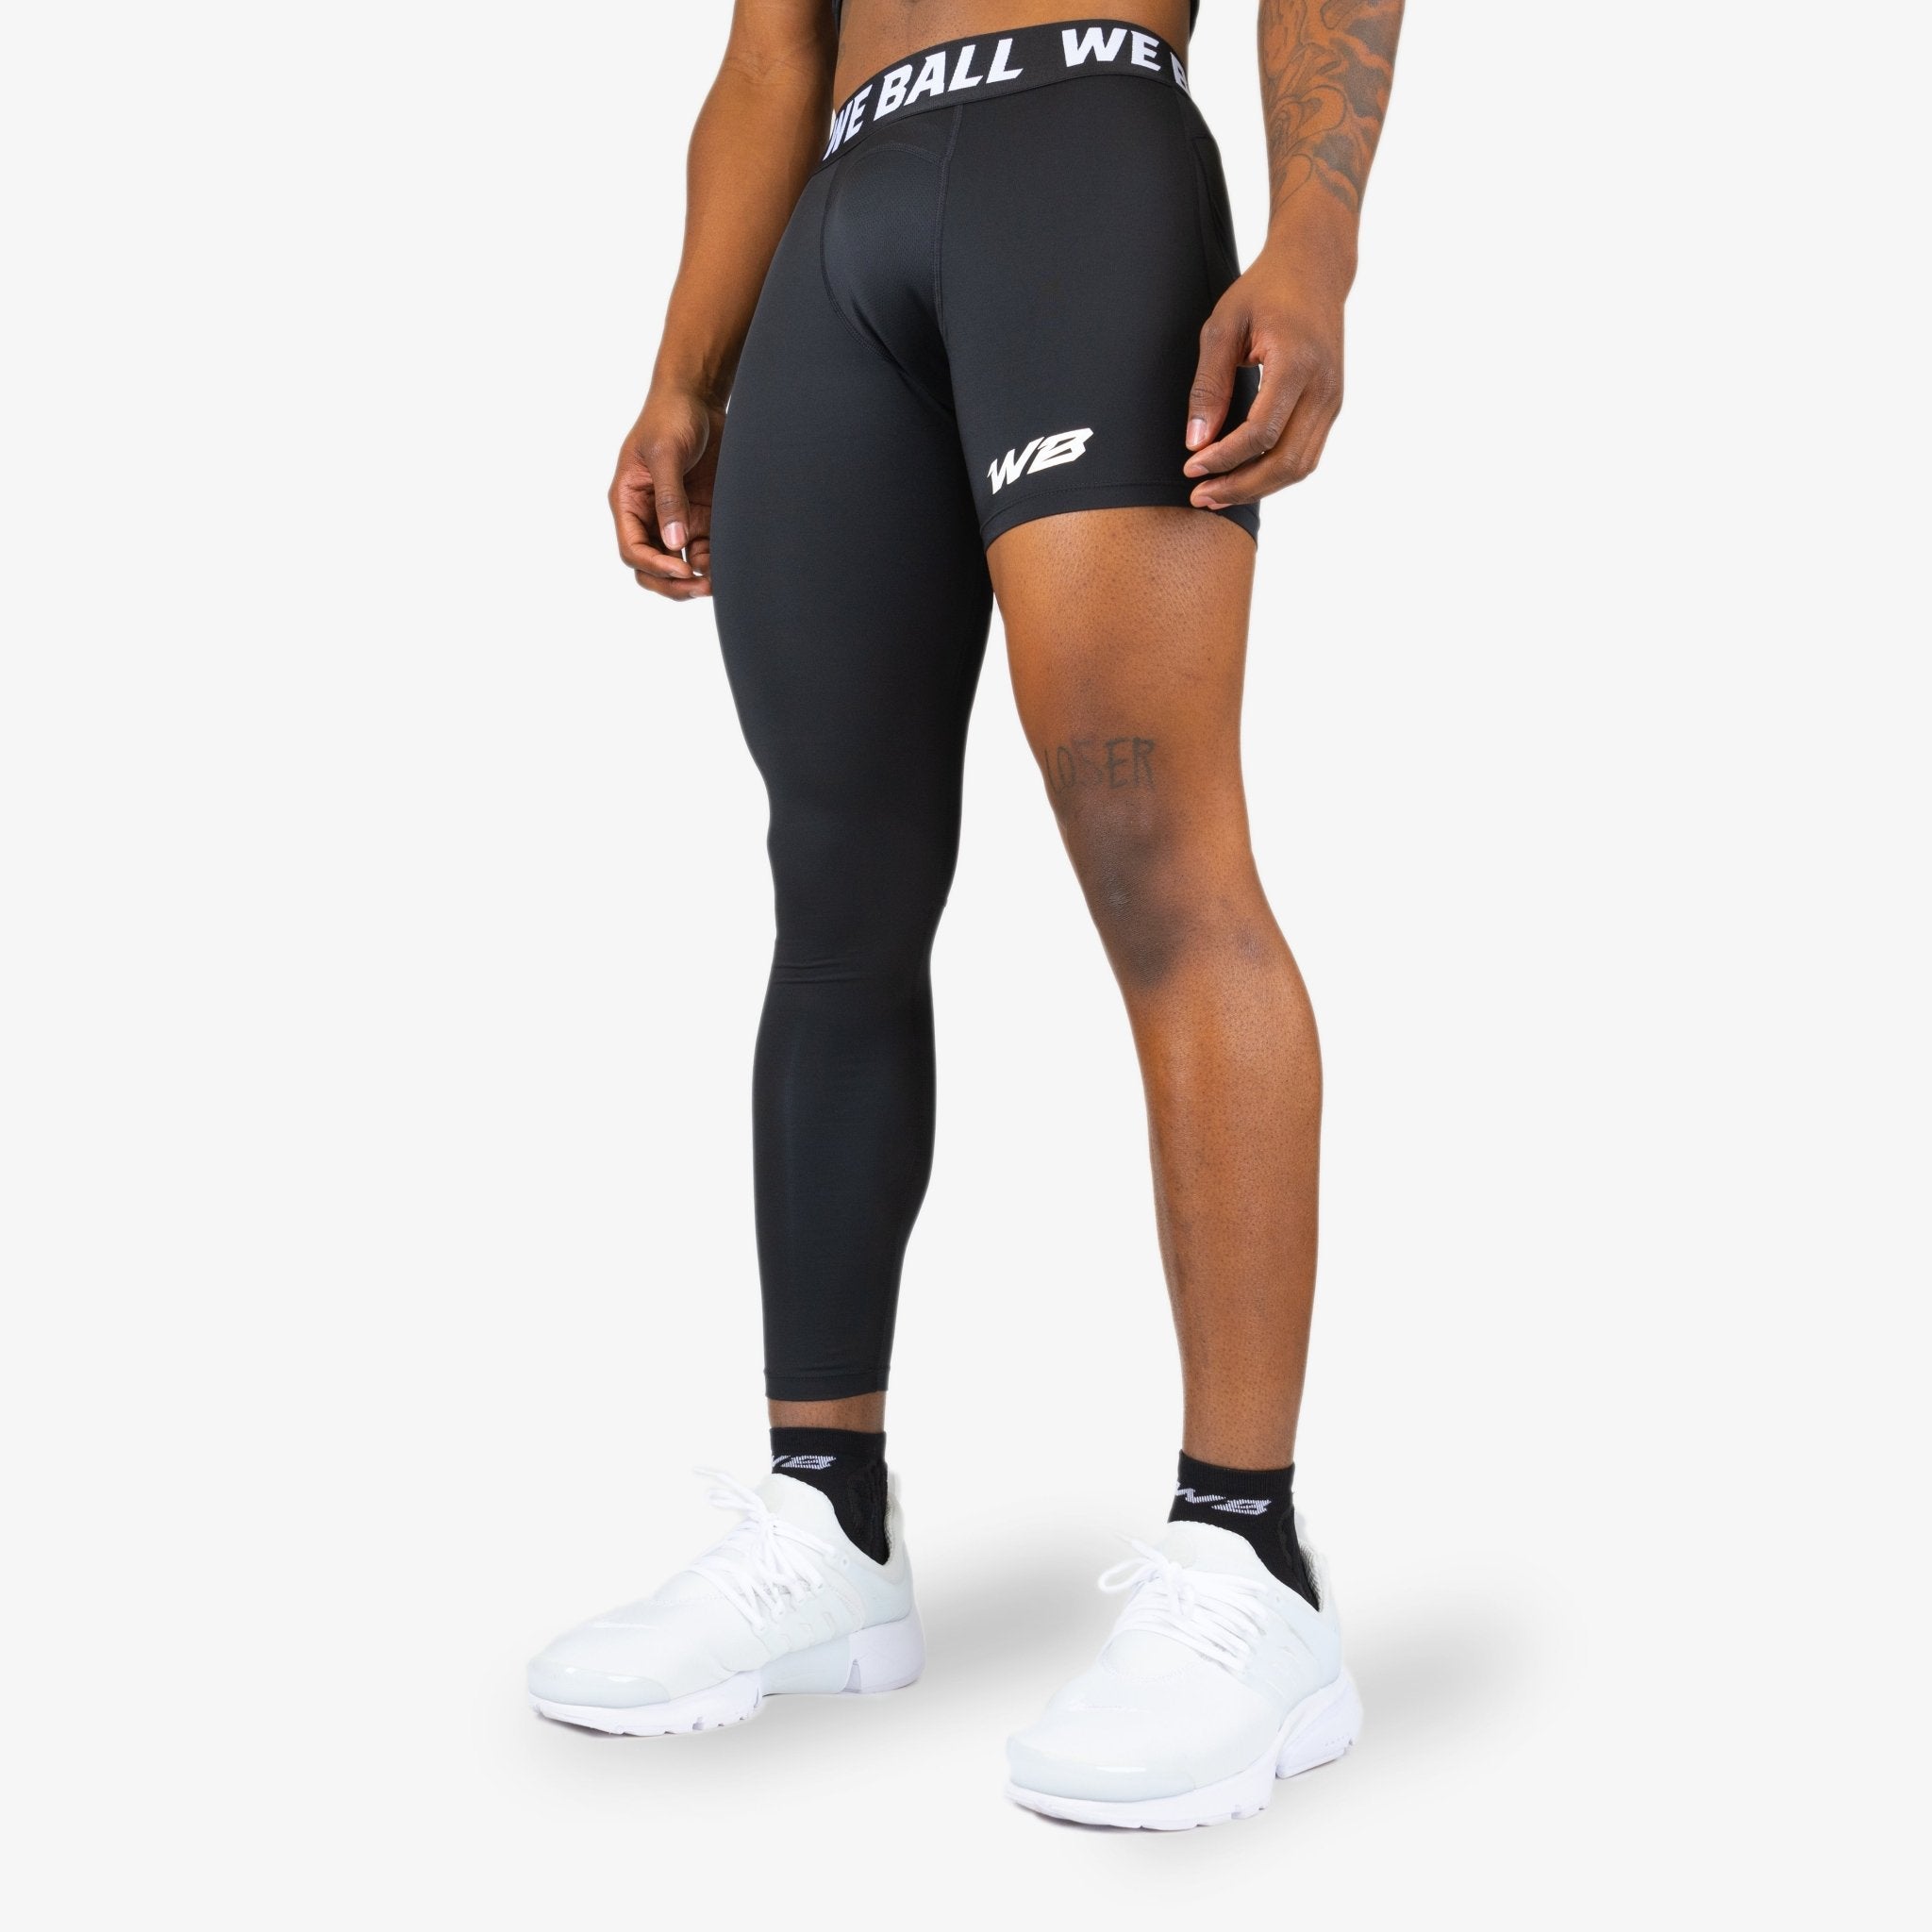  We Ball Sports Athletic Compression Tights